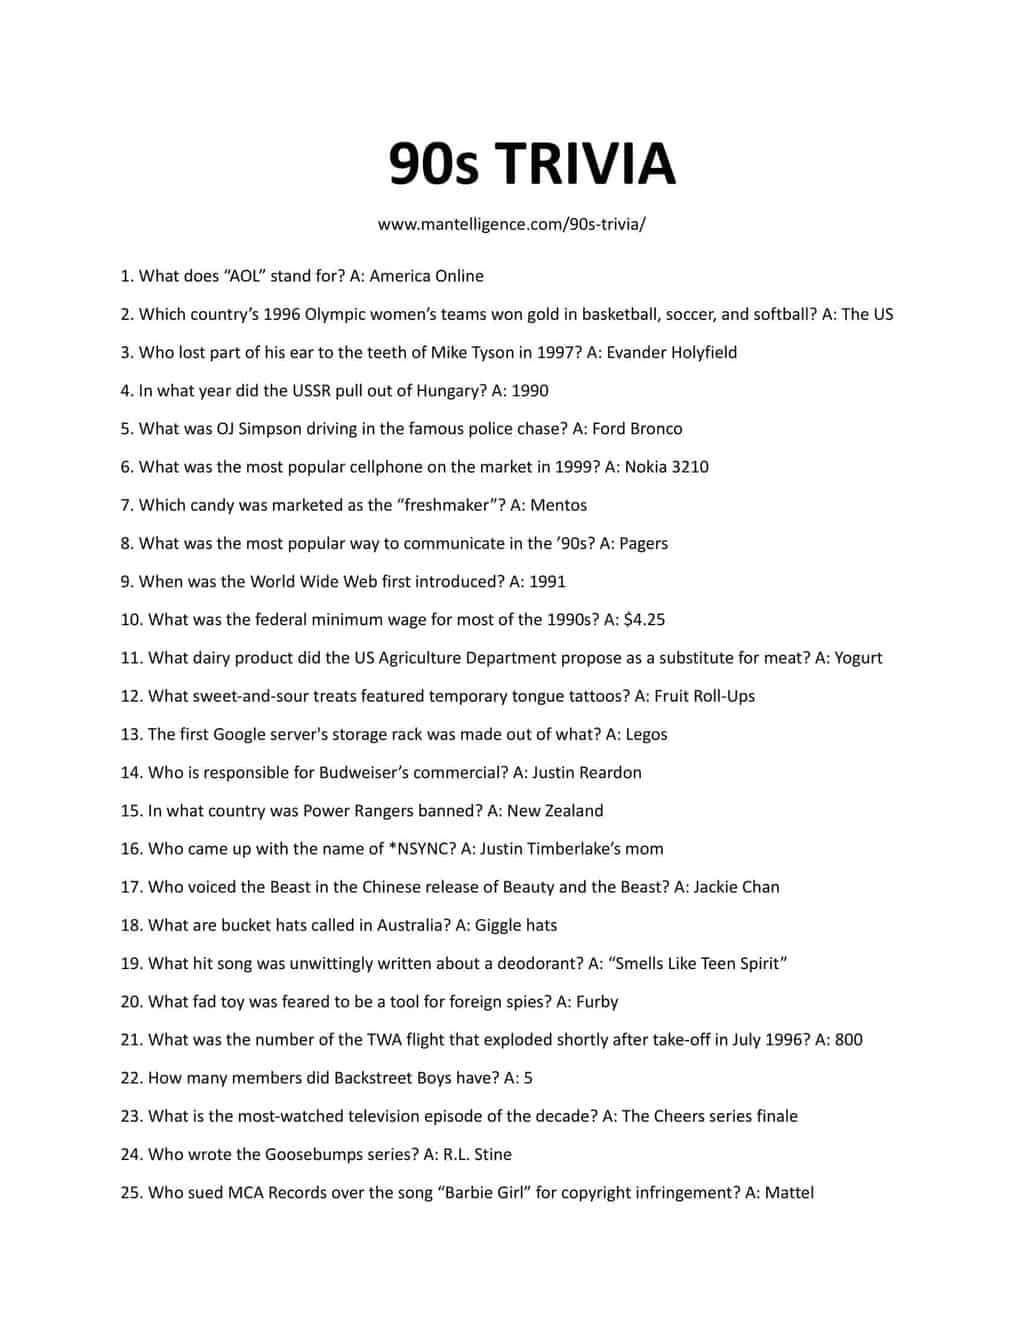 72 Best 90s Trivia Questions and Answers - This is the ...